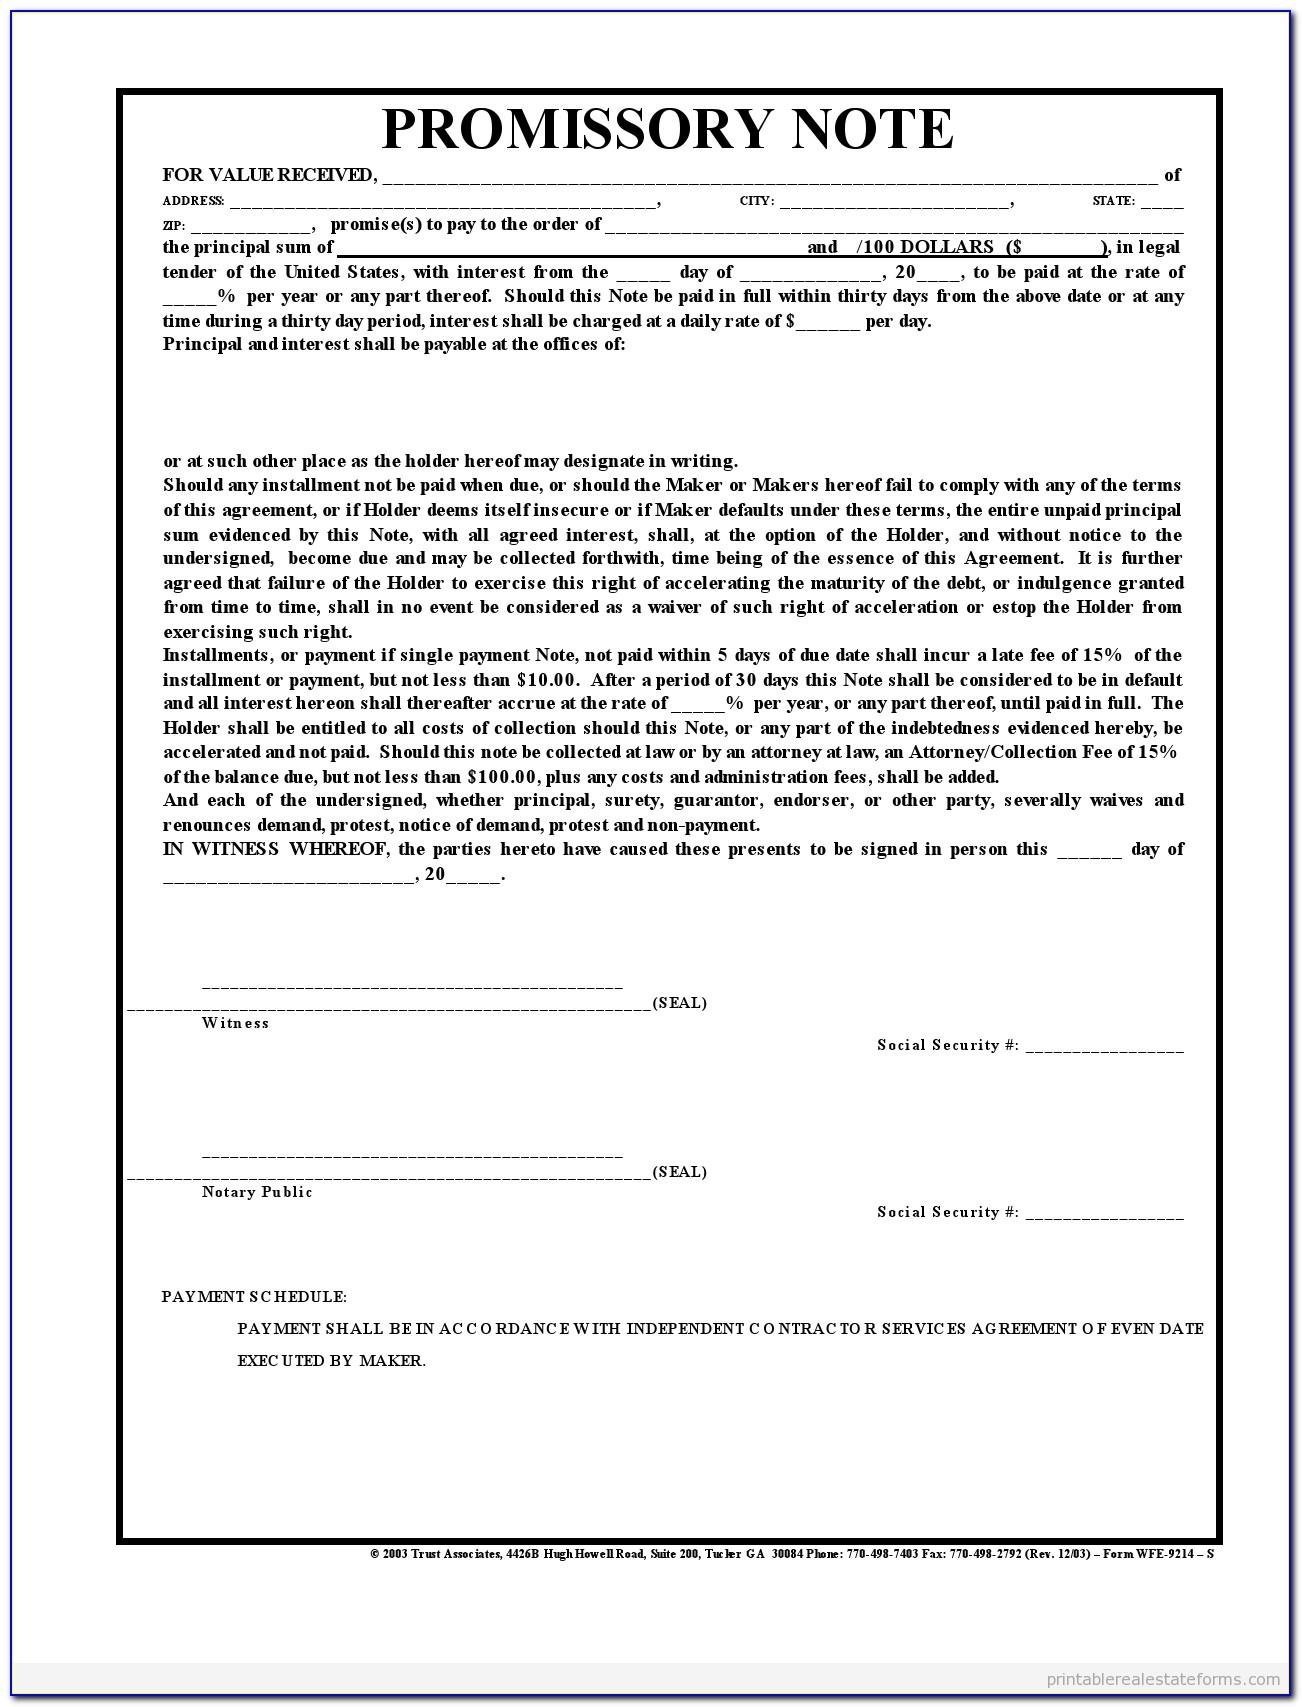 Texas Real Estate Promissory Note Form